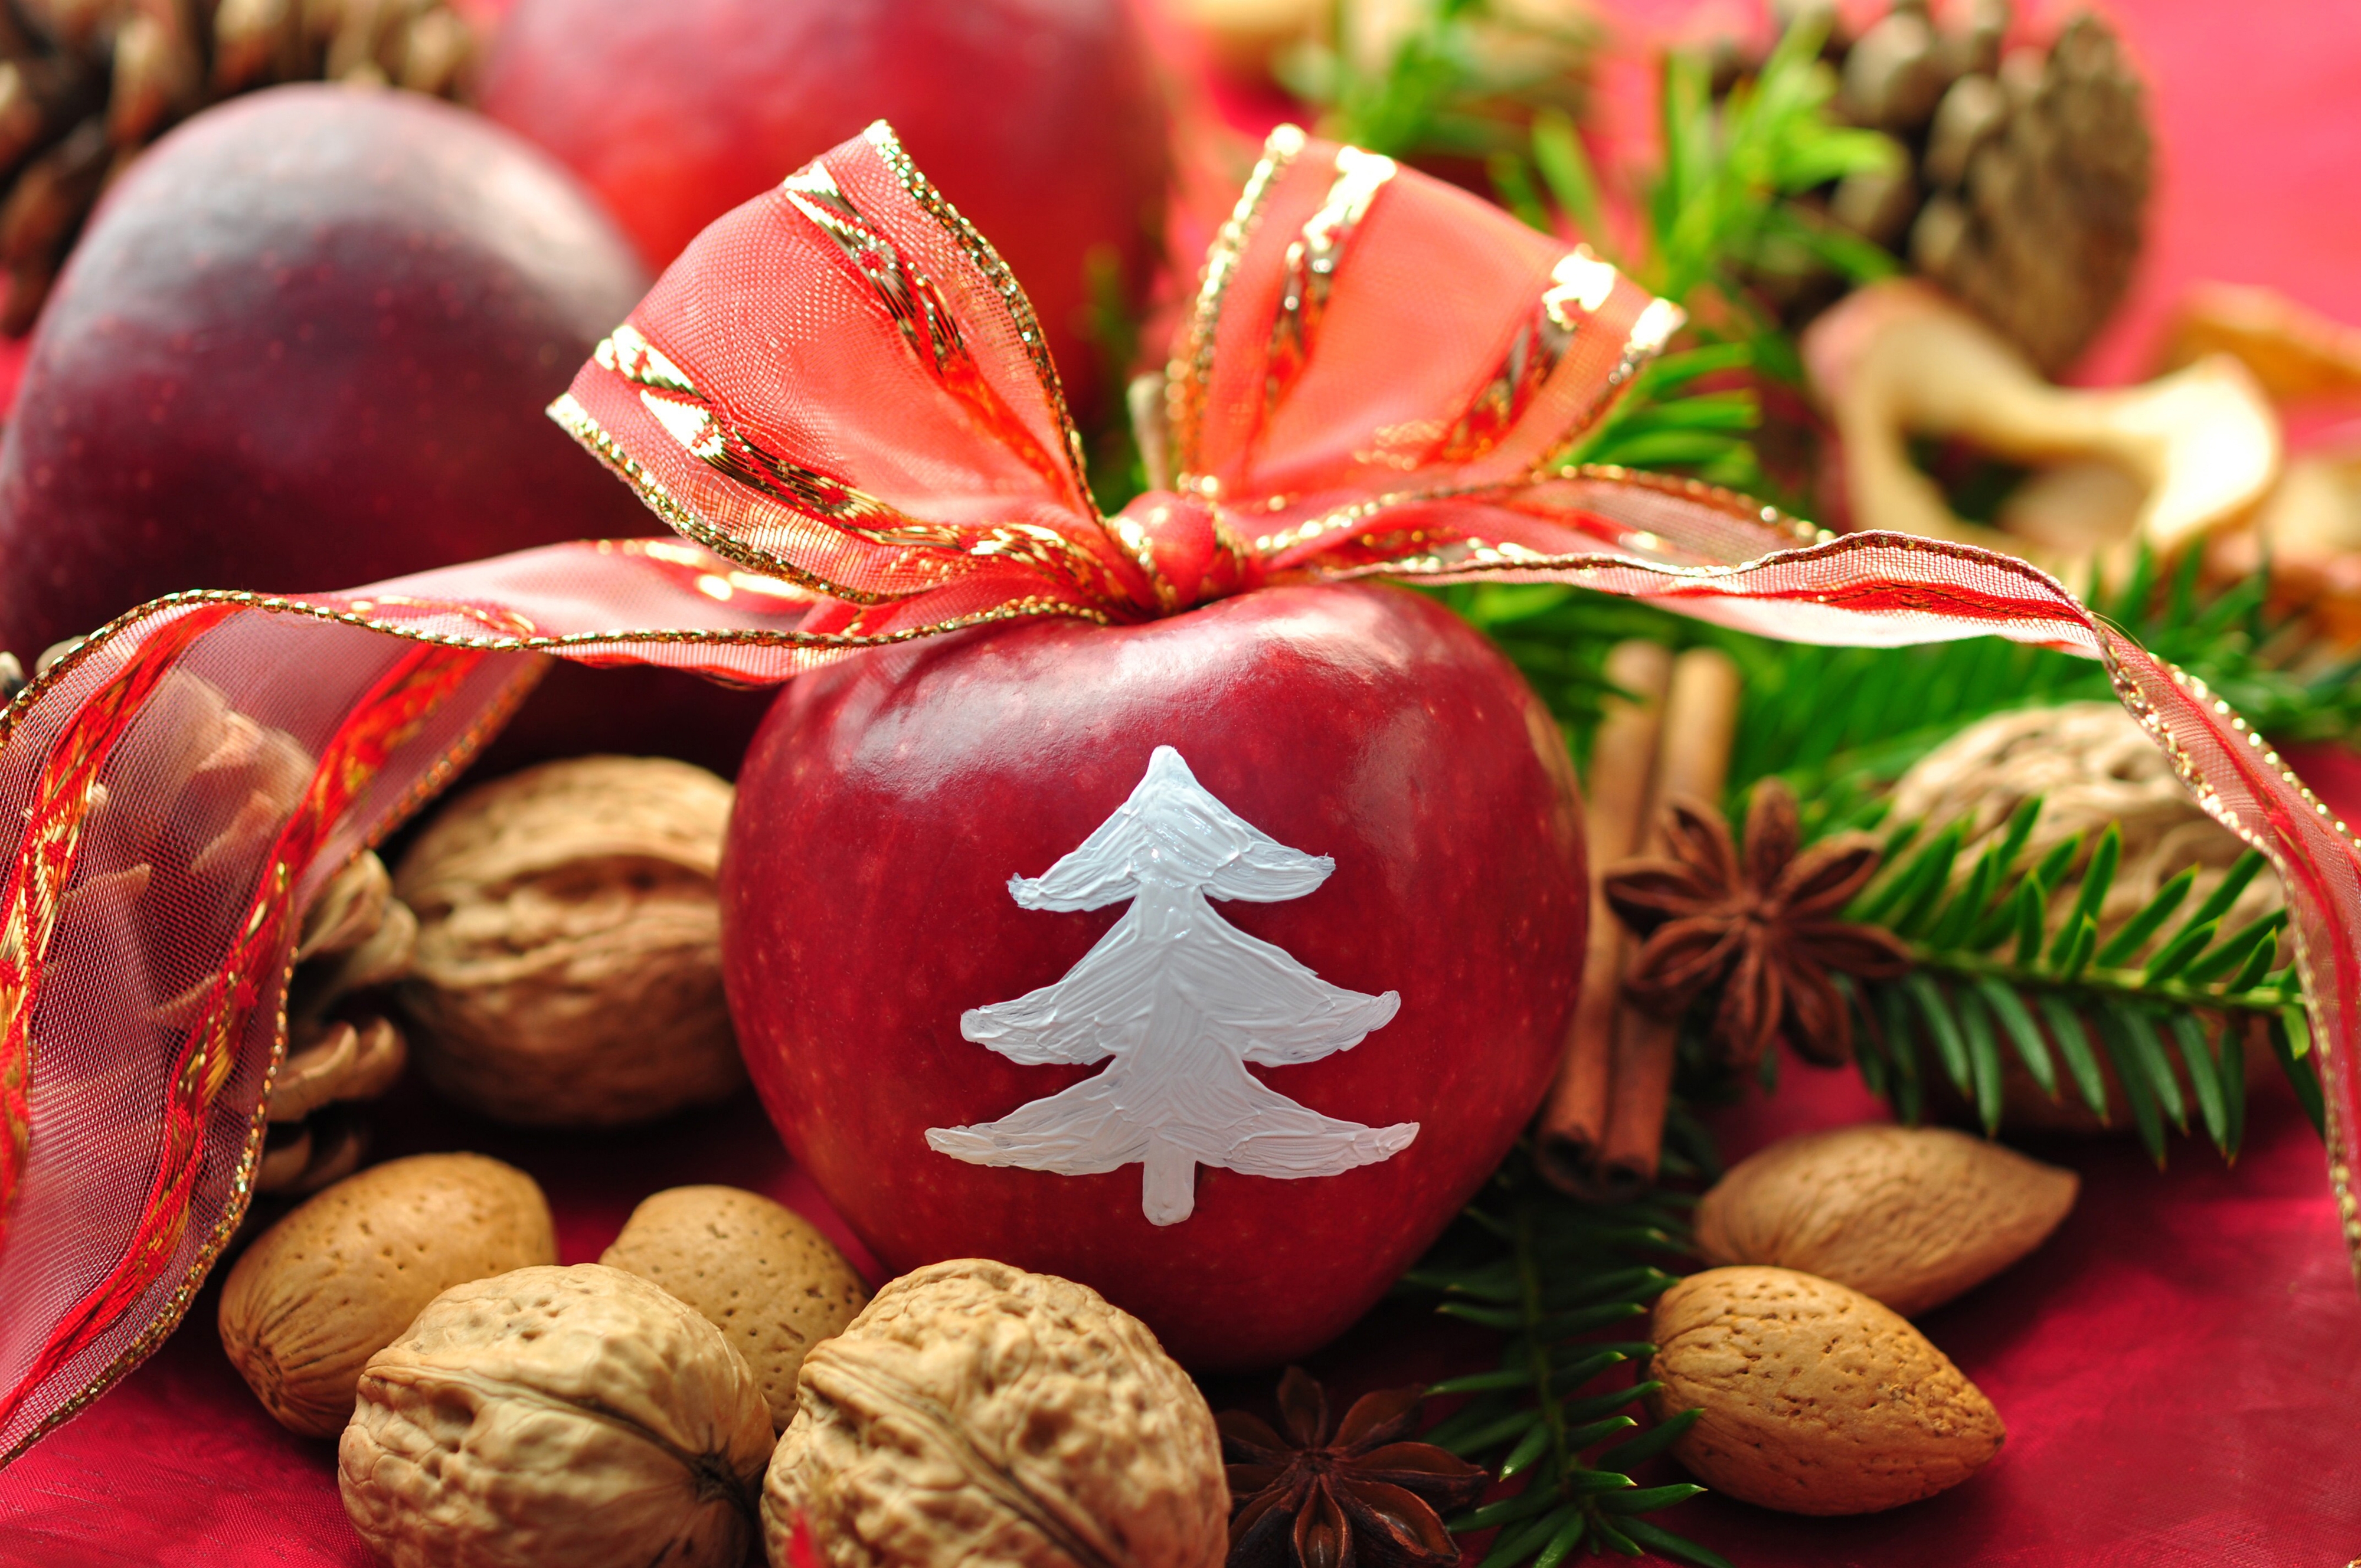 nuts, food, cones, new year, apples, cinnamon, holiday, table, needles, bow, tape, decor download HD wallpaper